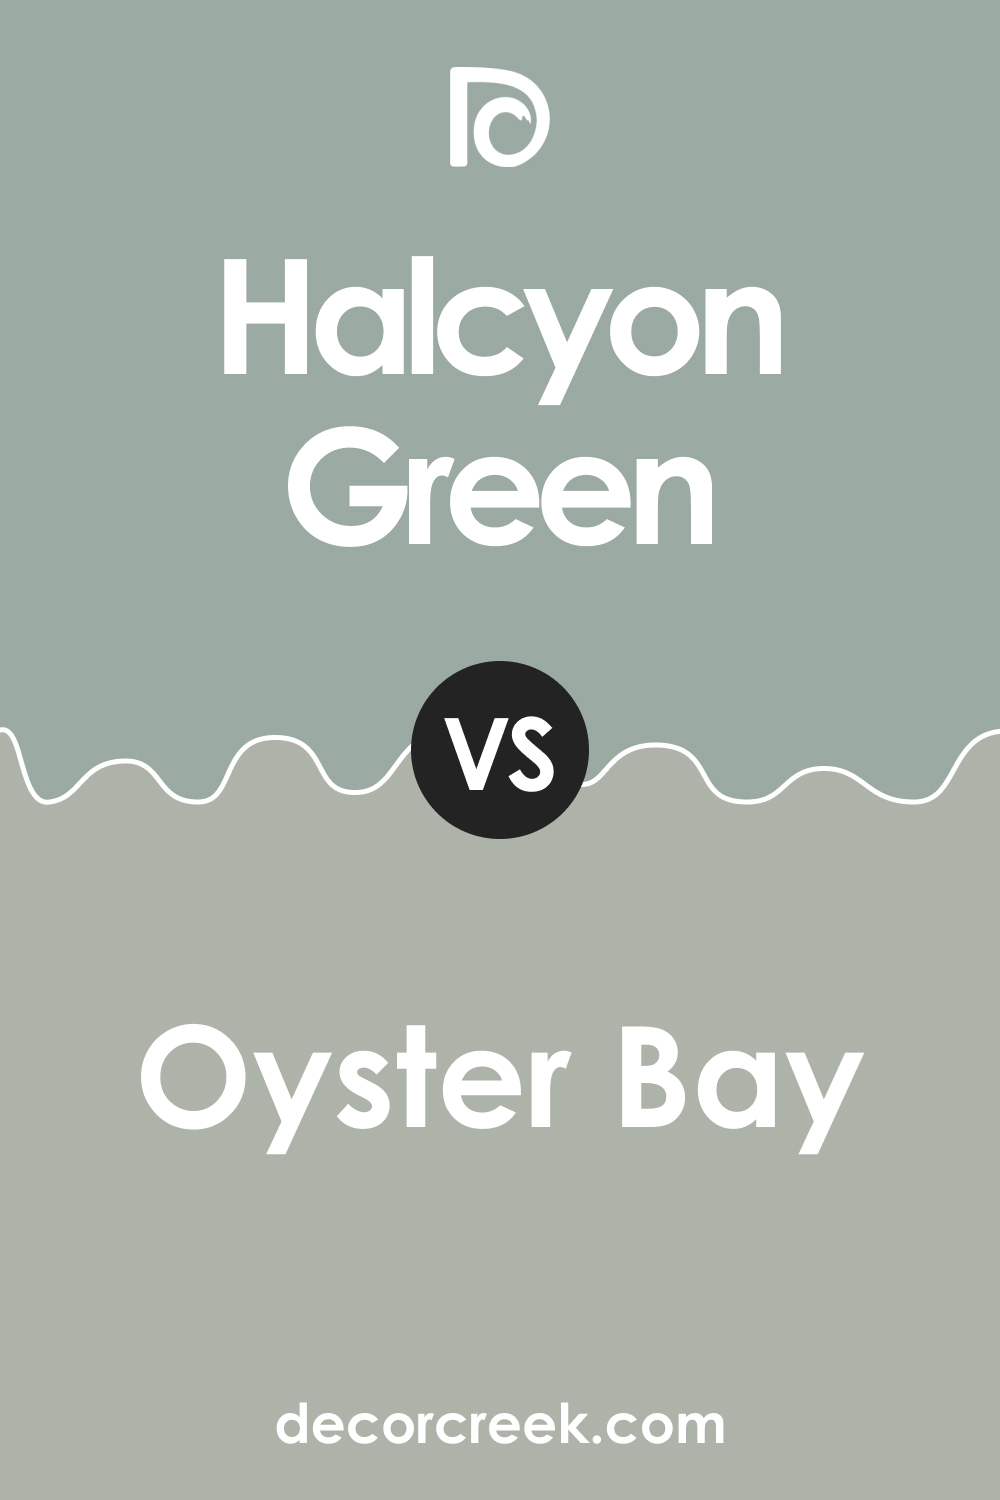 Halcyon Green vs Oyster Bay